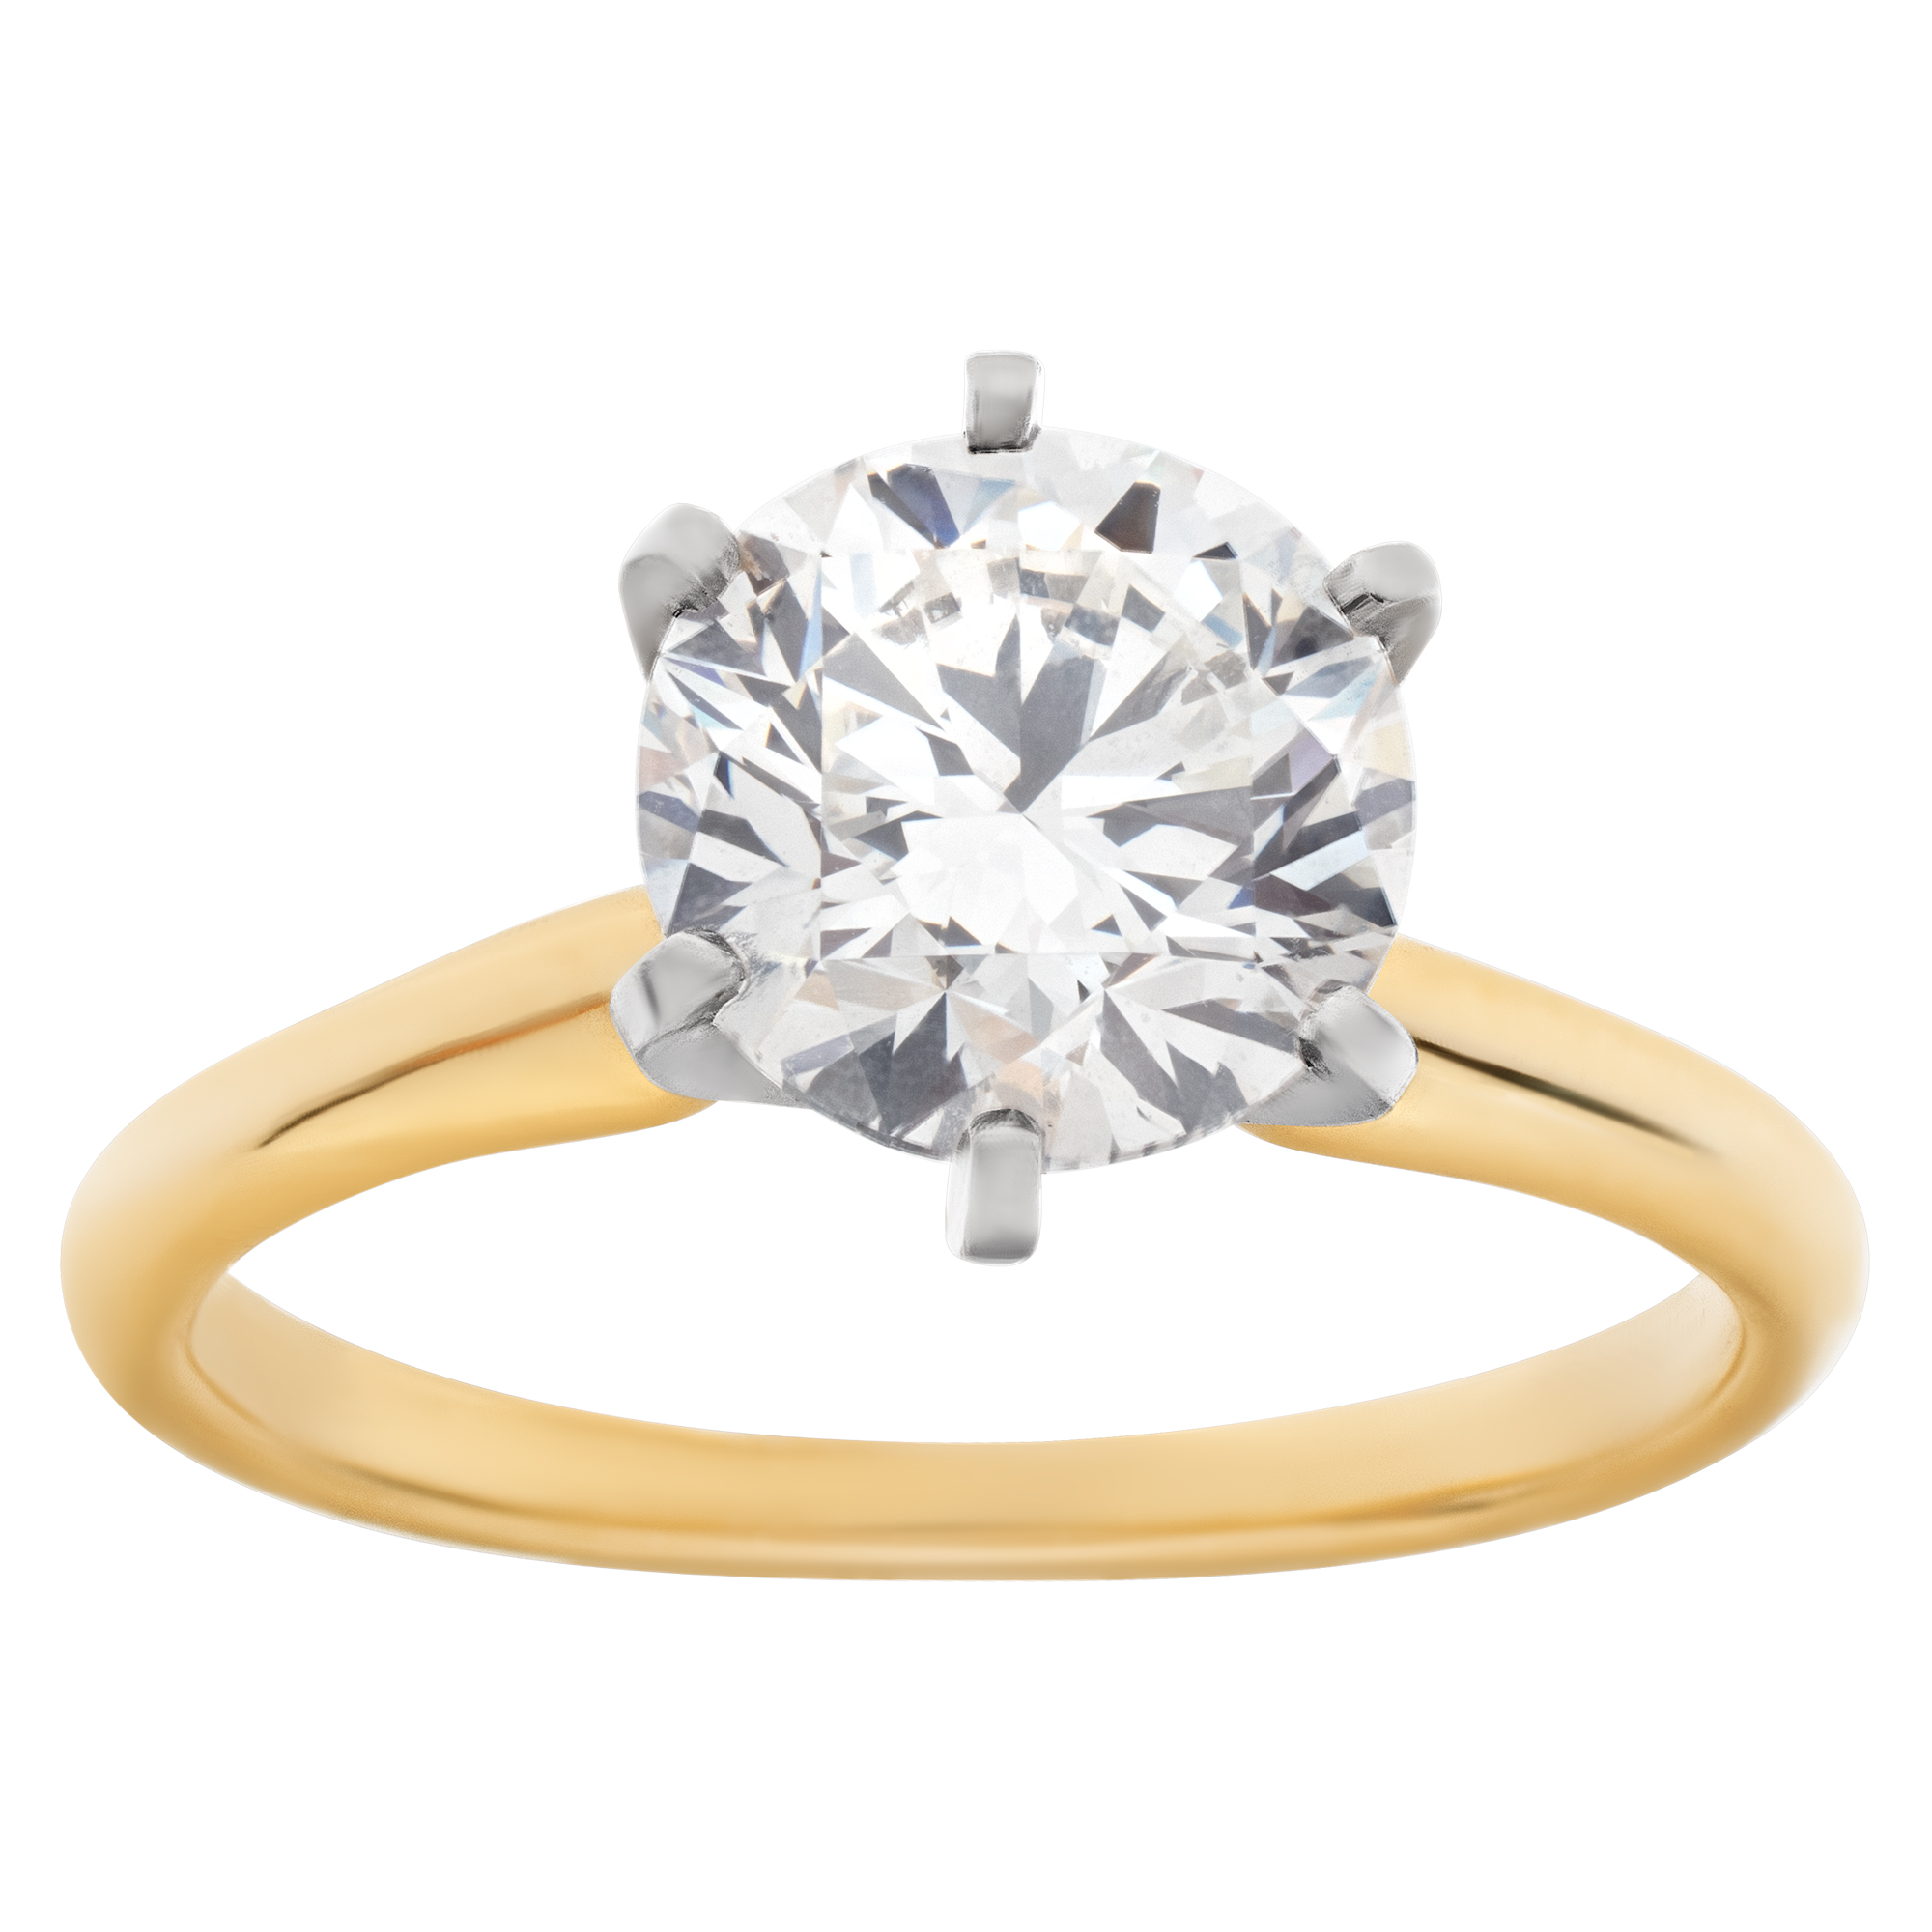 GIA certified round brilliant cut diamond 2.02 carat (G color, VVS2 clarity) solitaire ring